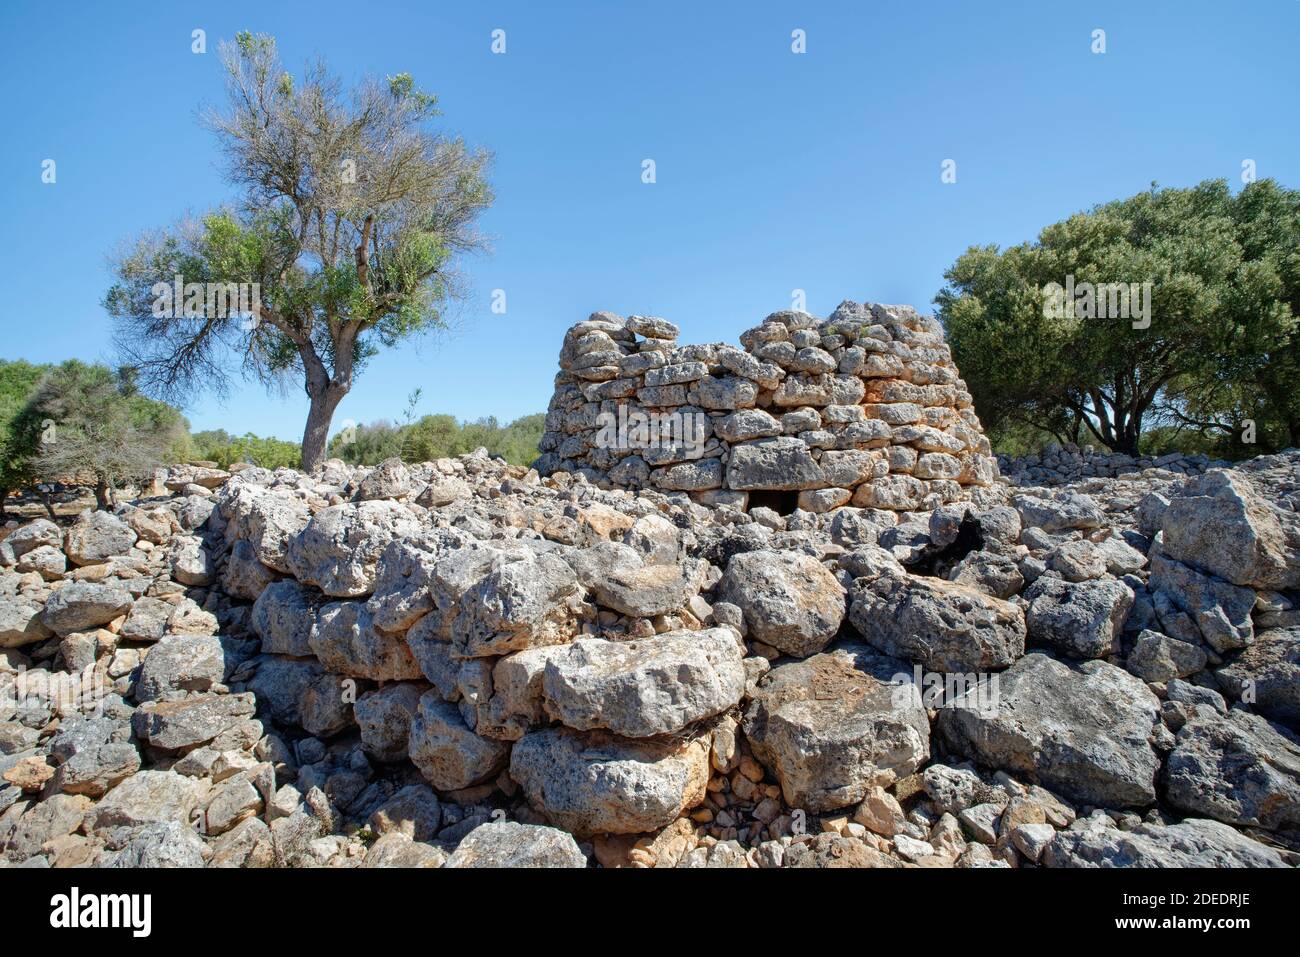 Bronze Age “Talaiot” burial chamber at Capocorb Vell, a settlement built by the ancient Talaiotic culture, Cala Pi, Mallorca. Stock Photo